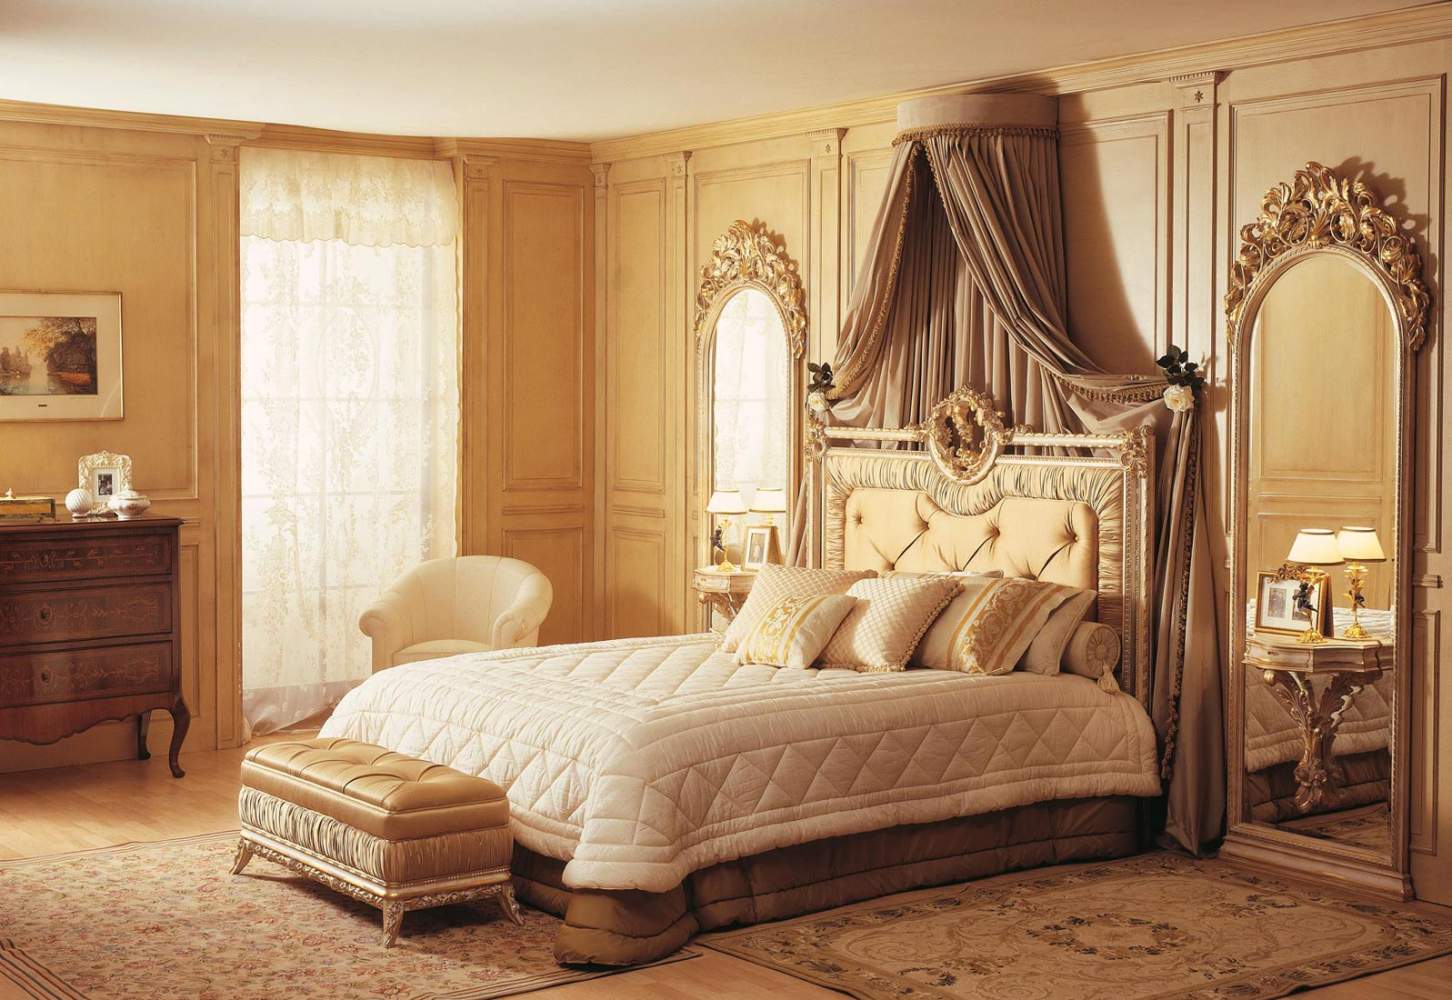 Furniture for classic bedroom of the Louvre version